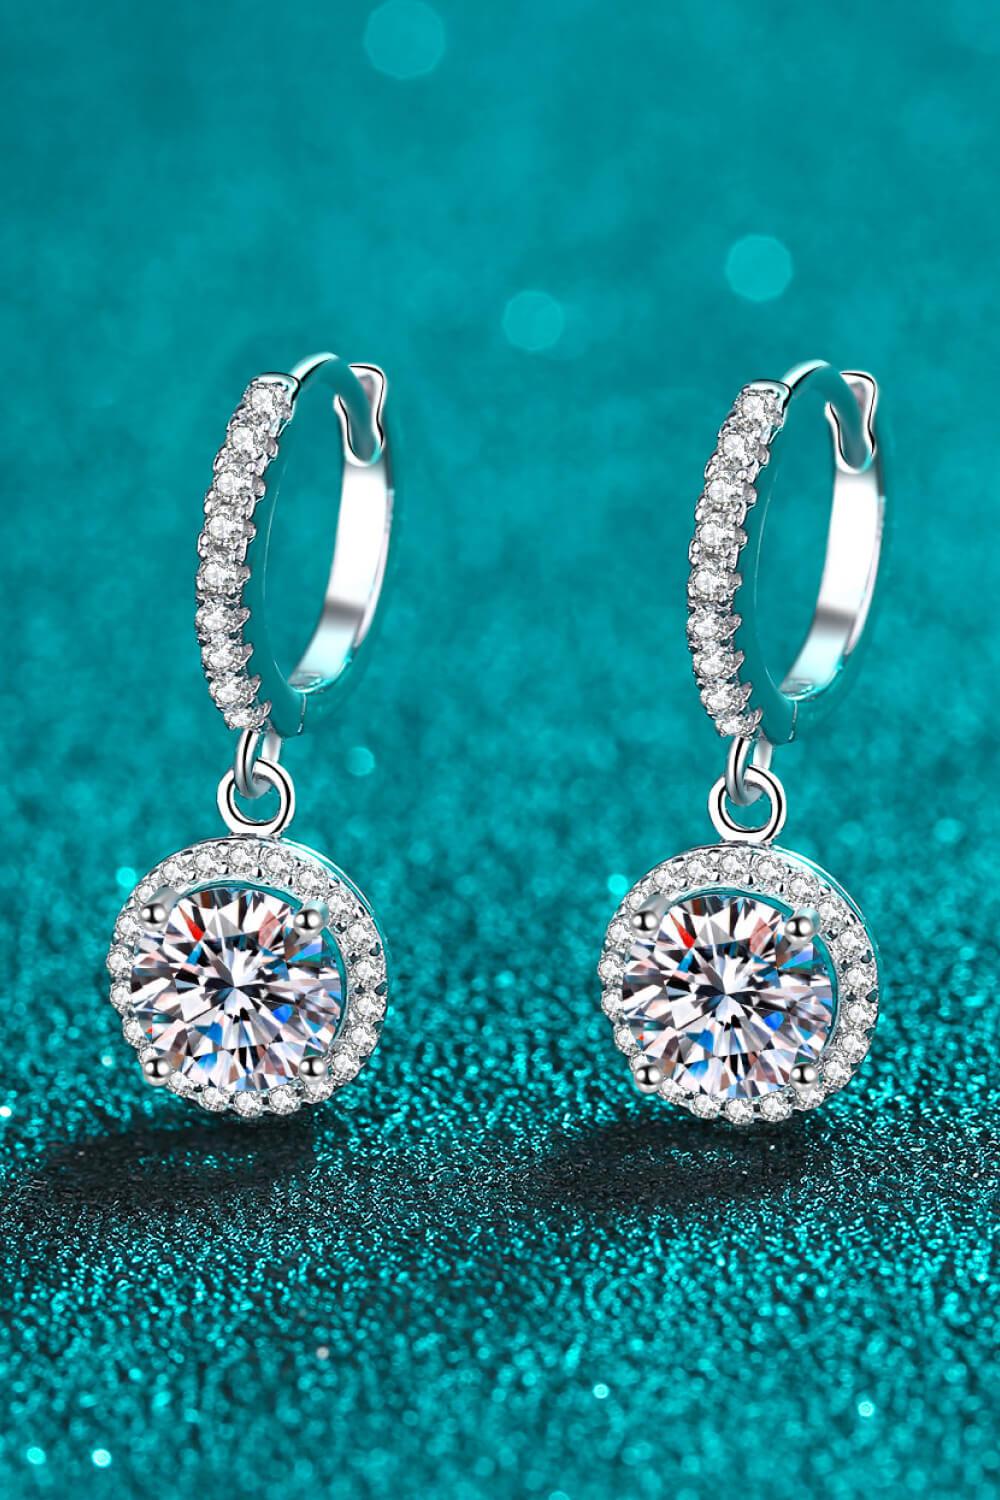 2 Carat Moissanite Round-Shaped Drop Earrings BLUE ZONE PLANET